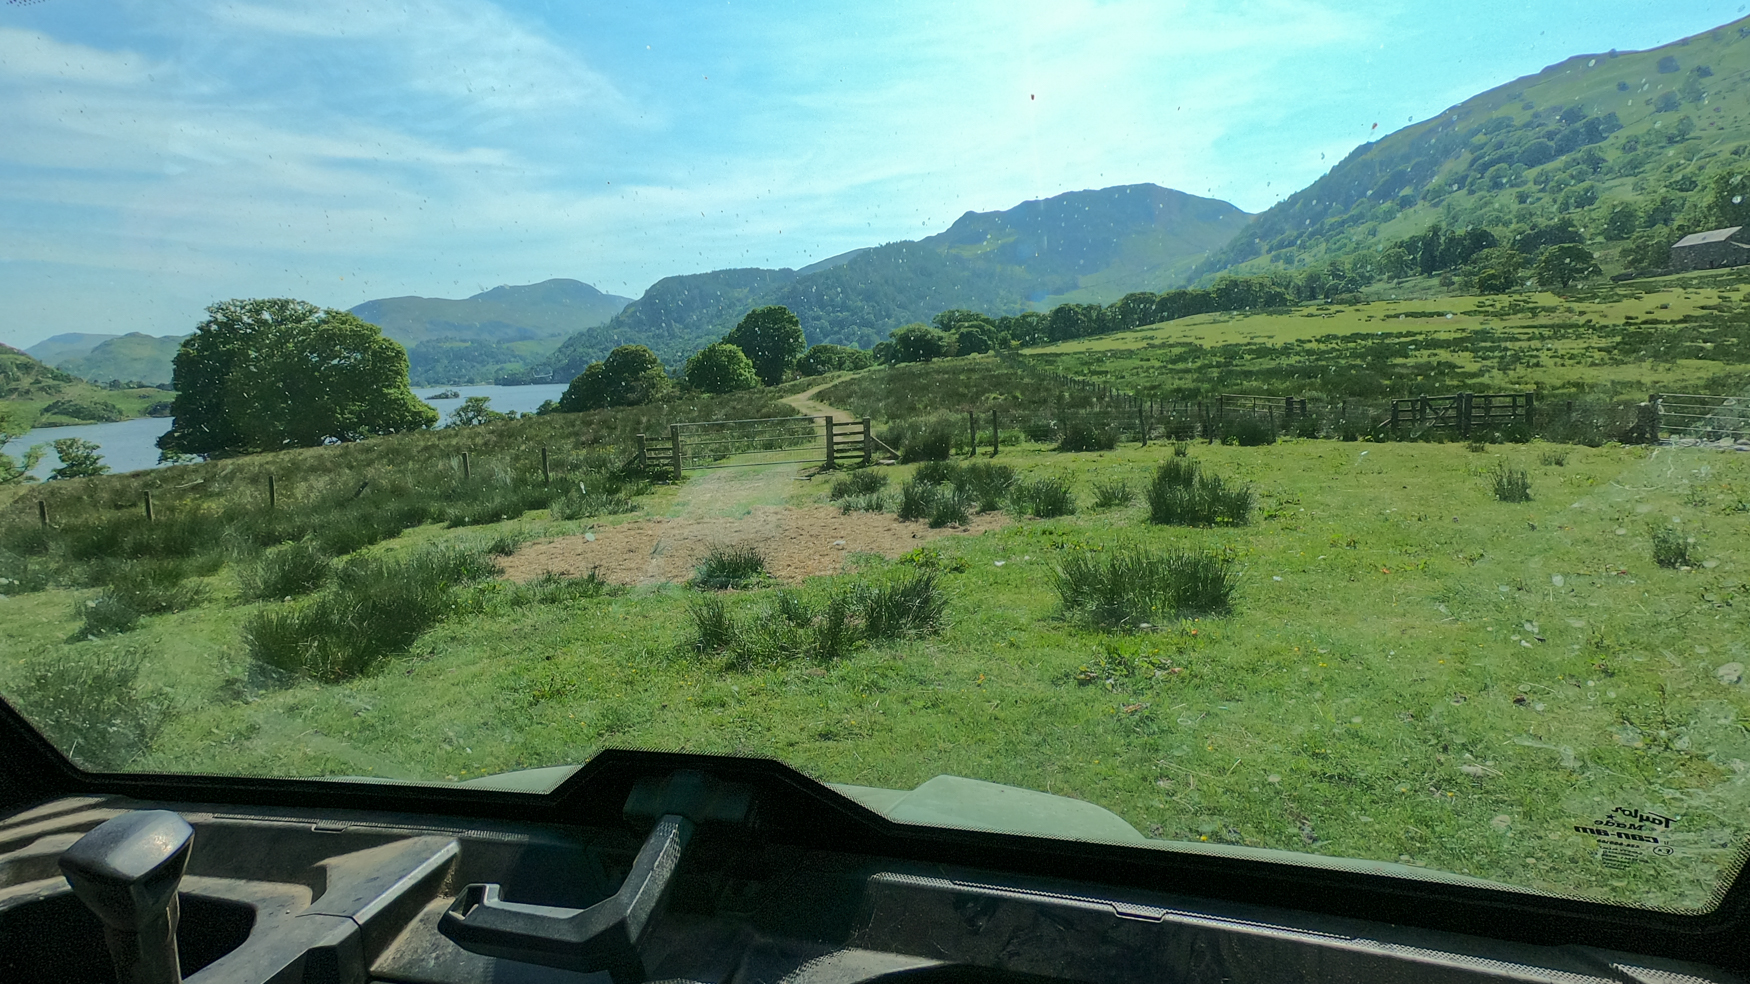 View through the windscreen of a quad bike, looking across green fields towards distant hills